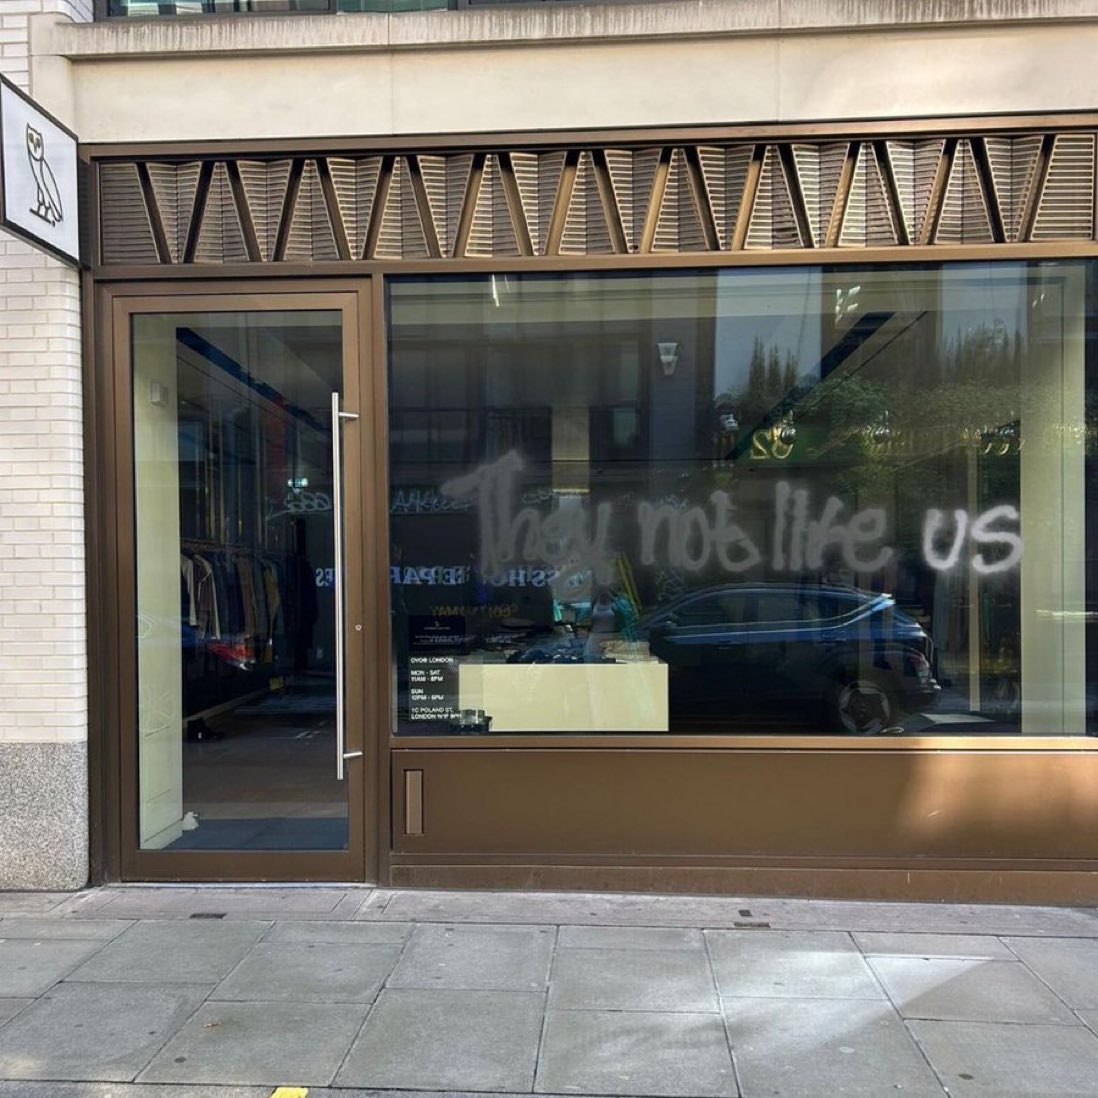 Drake's OVO Store in London has been vandalized. The front window was spray painted 'They Not Like Us'